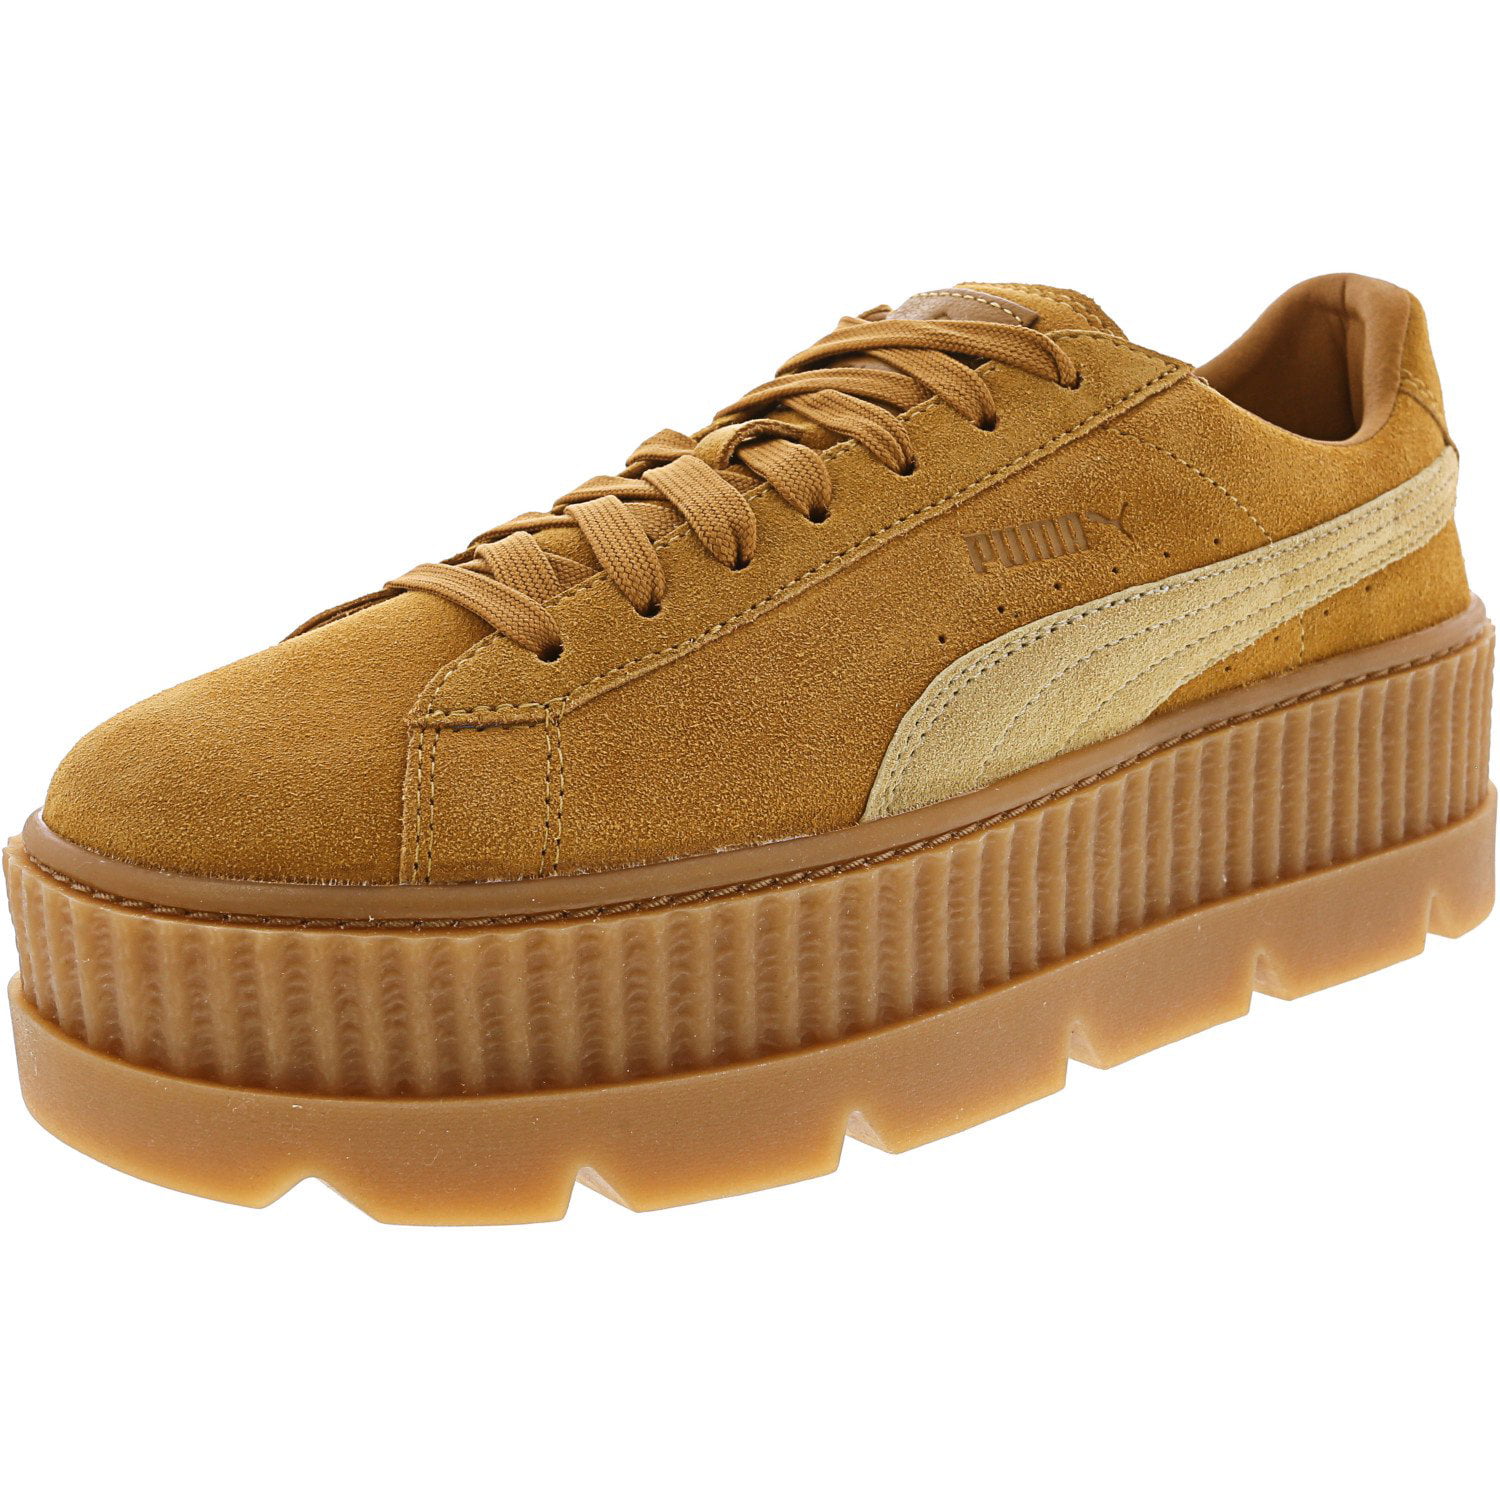 puma women's cleated creeper suede ankle high fashion sneaker